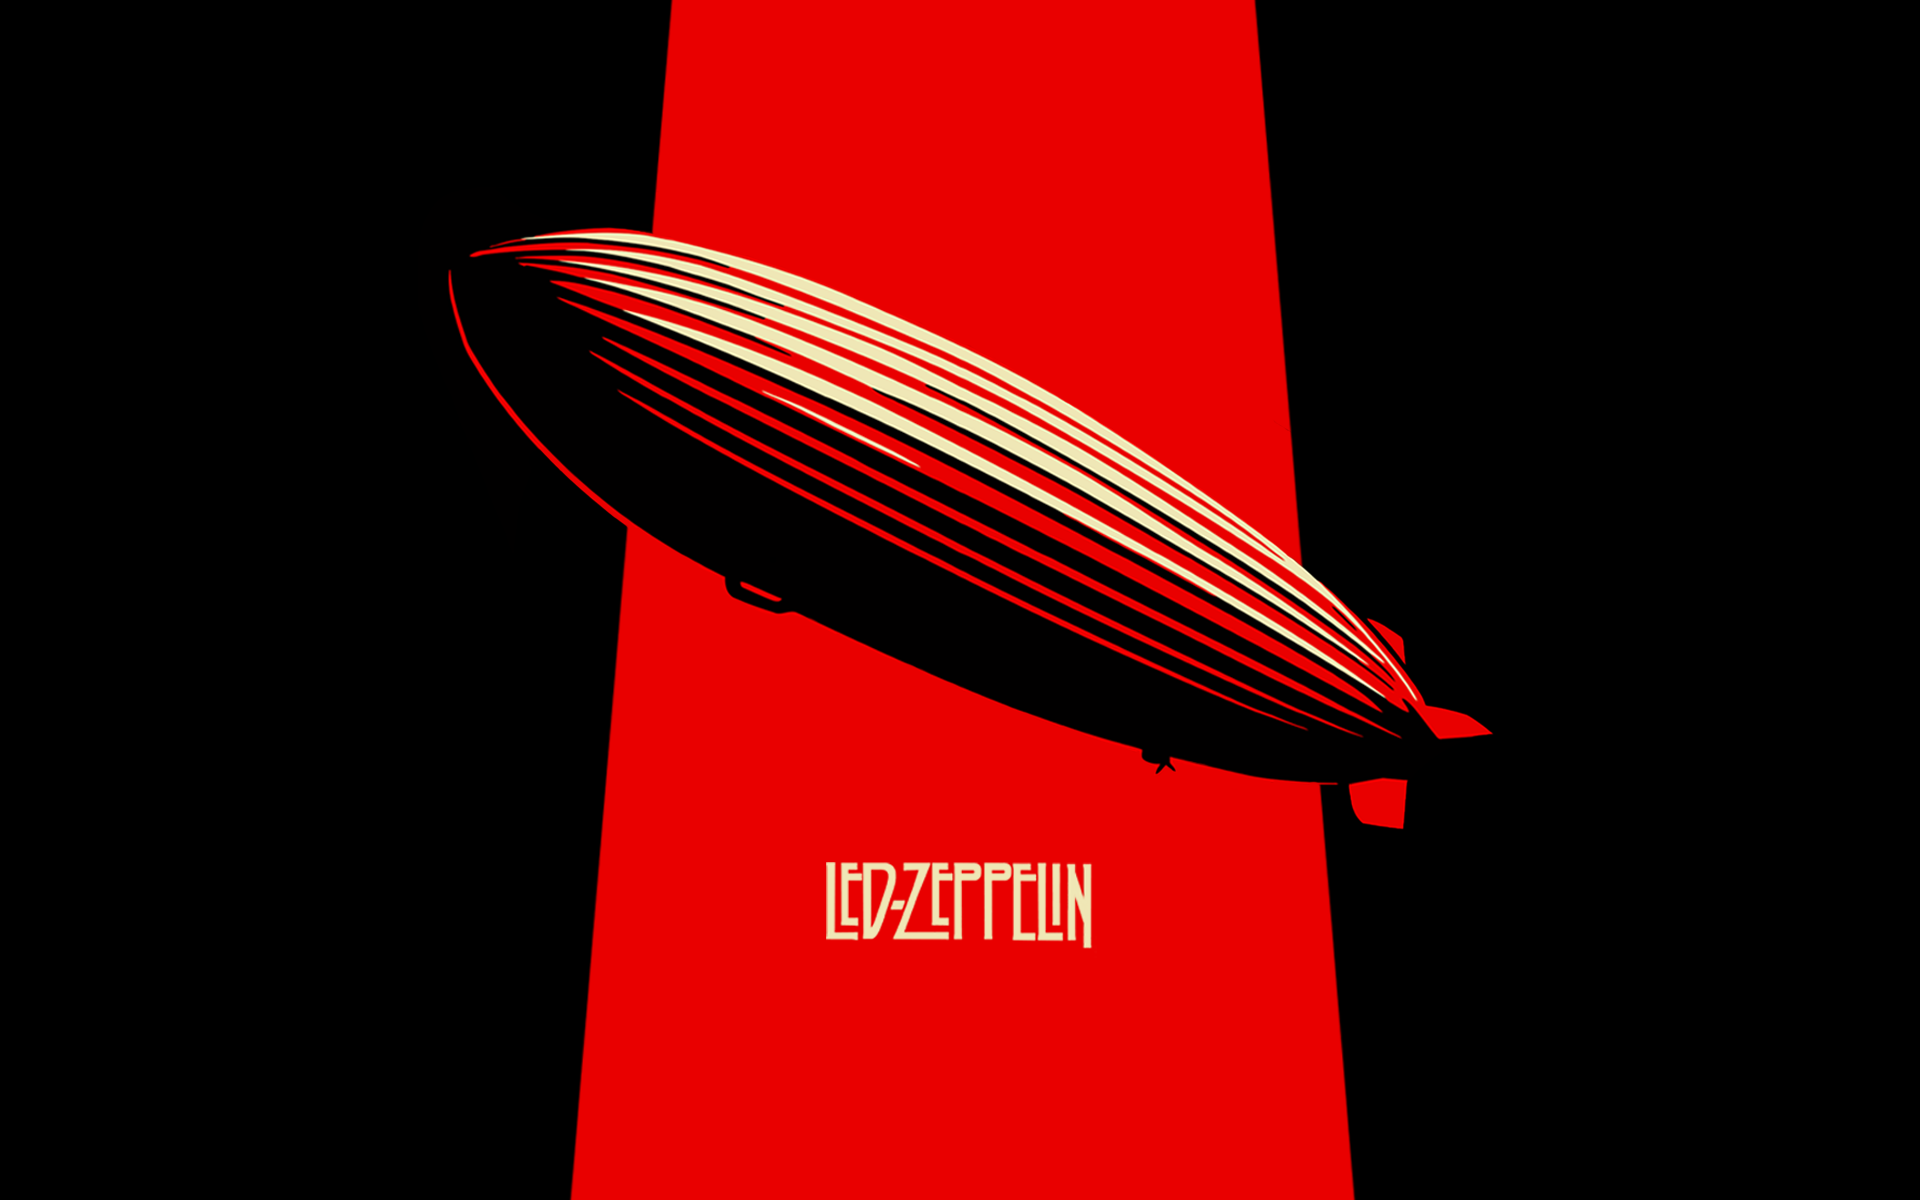 Led zeppelin hd papers and backgrounds